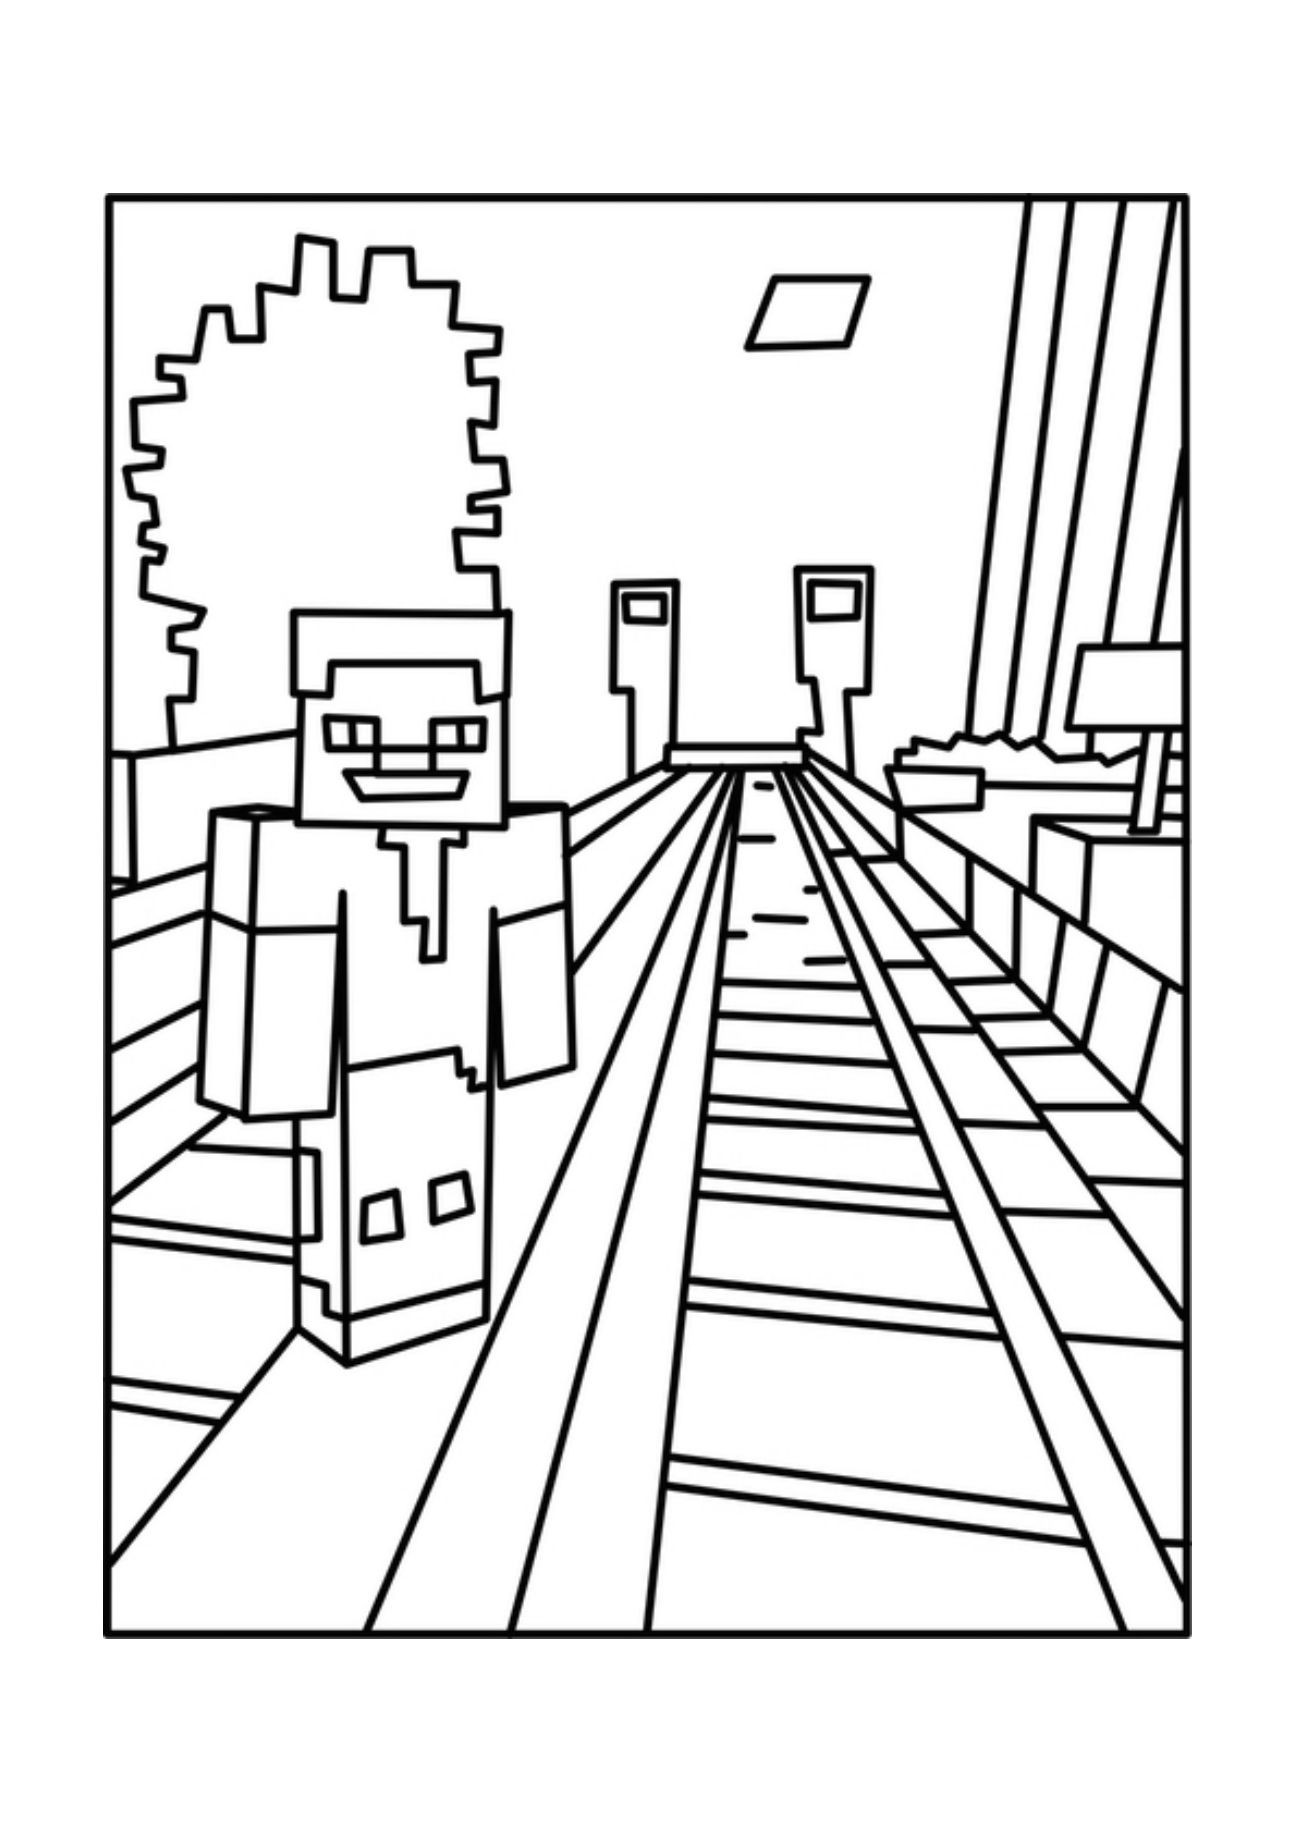 Free Printable Minecraft Coloring Pages
 Printable Minecraft Coloring Page